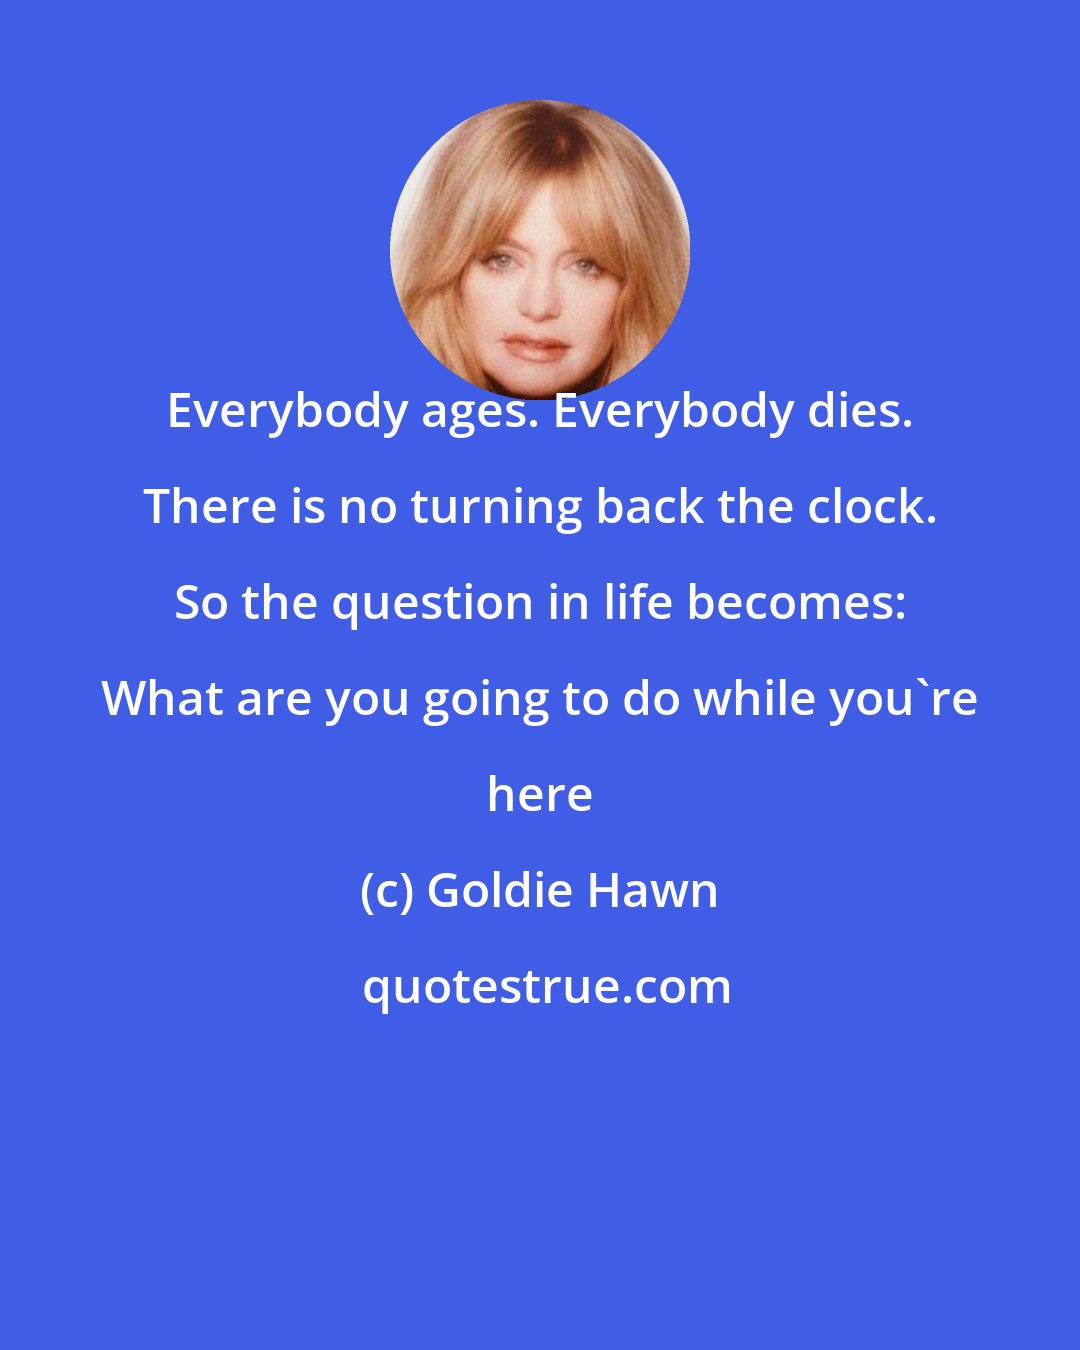 Goldie Hawn: Everybody ages. Everybody dies. There is no turning back the clock. So the question in life becomes: What are you going to do while you're here